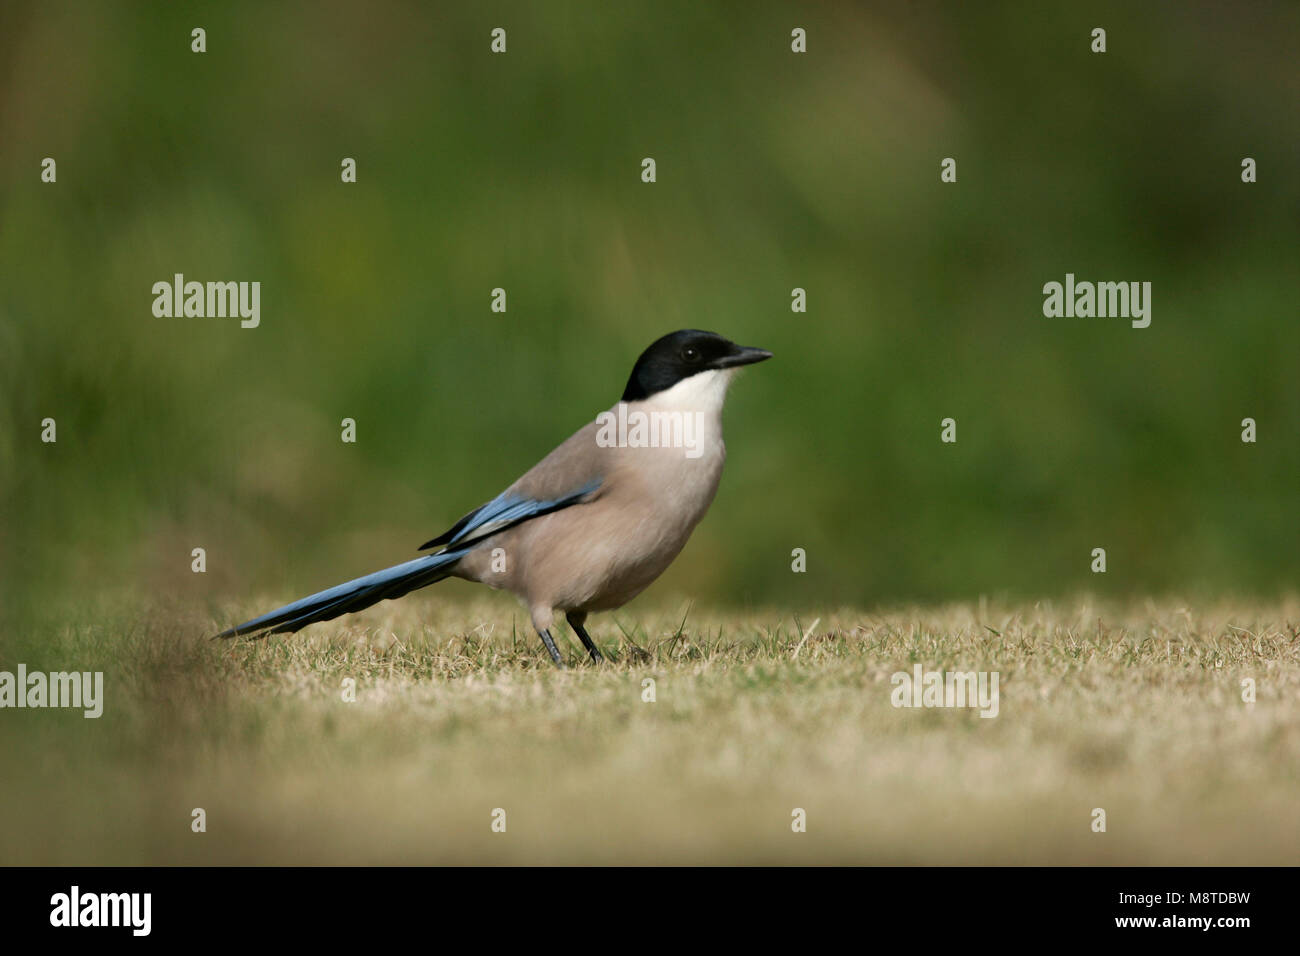 Azure-winged Magpie on ground Portugal, Blauwe Ekster op grond Portugal Stock Photo